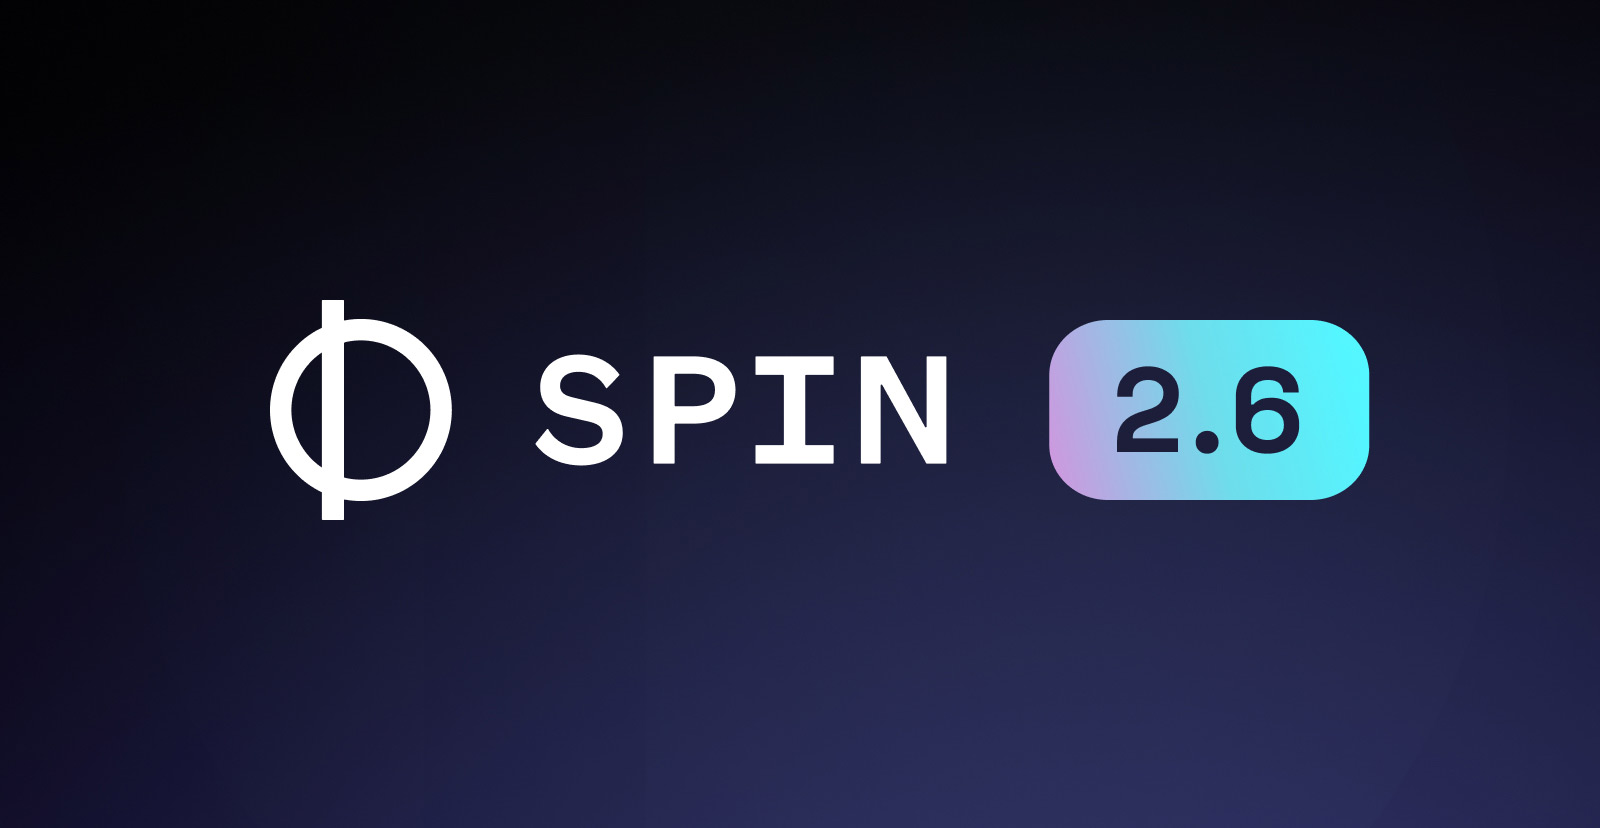 Announcing Spin 2.6